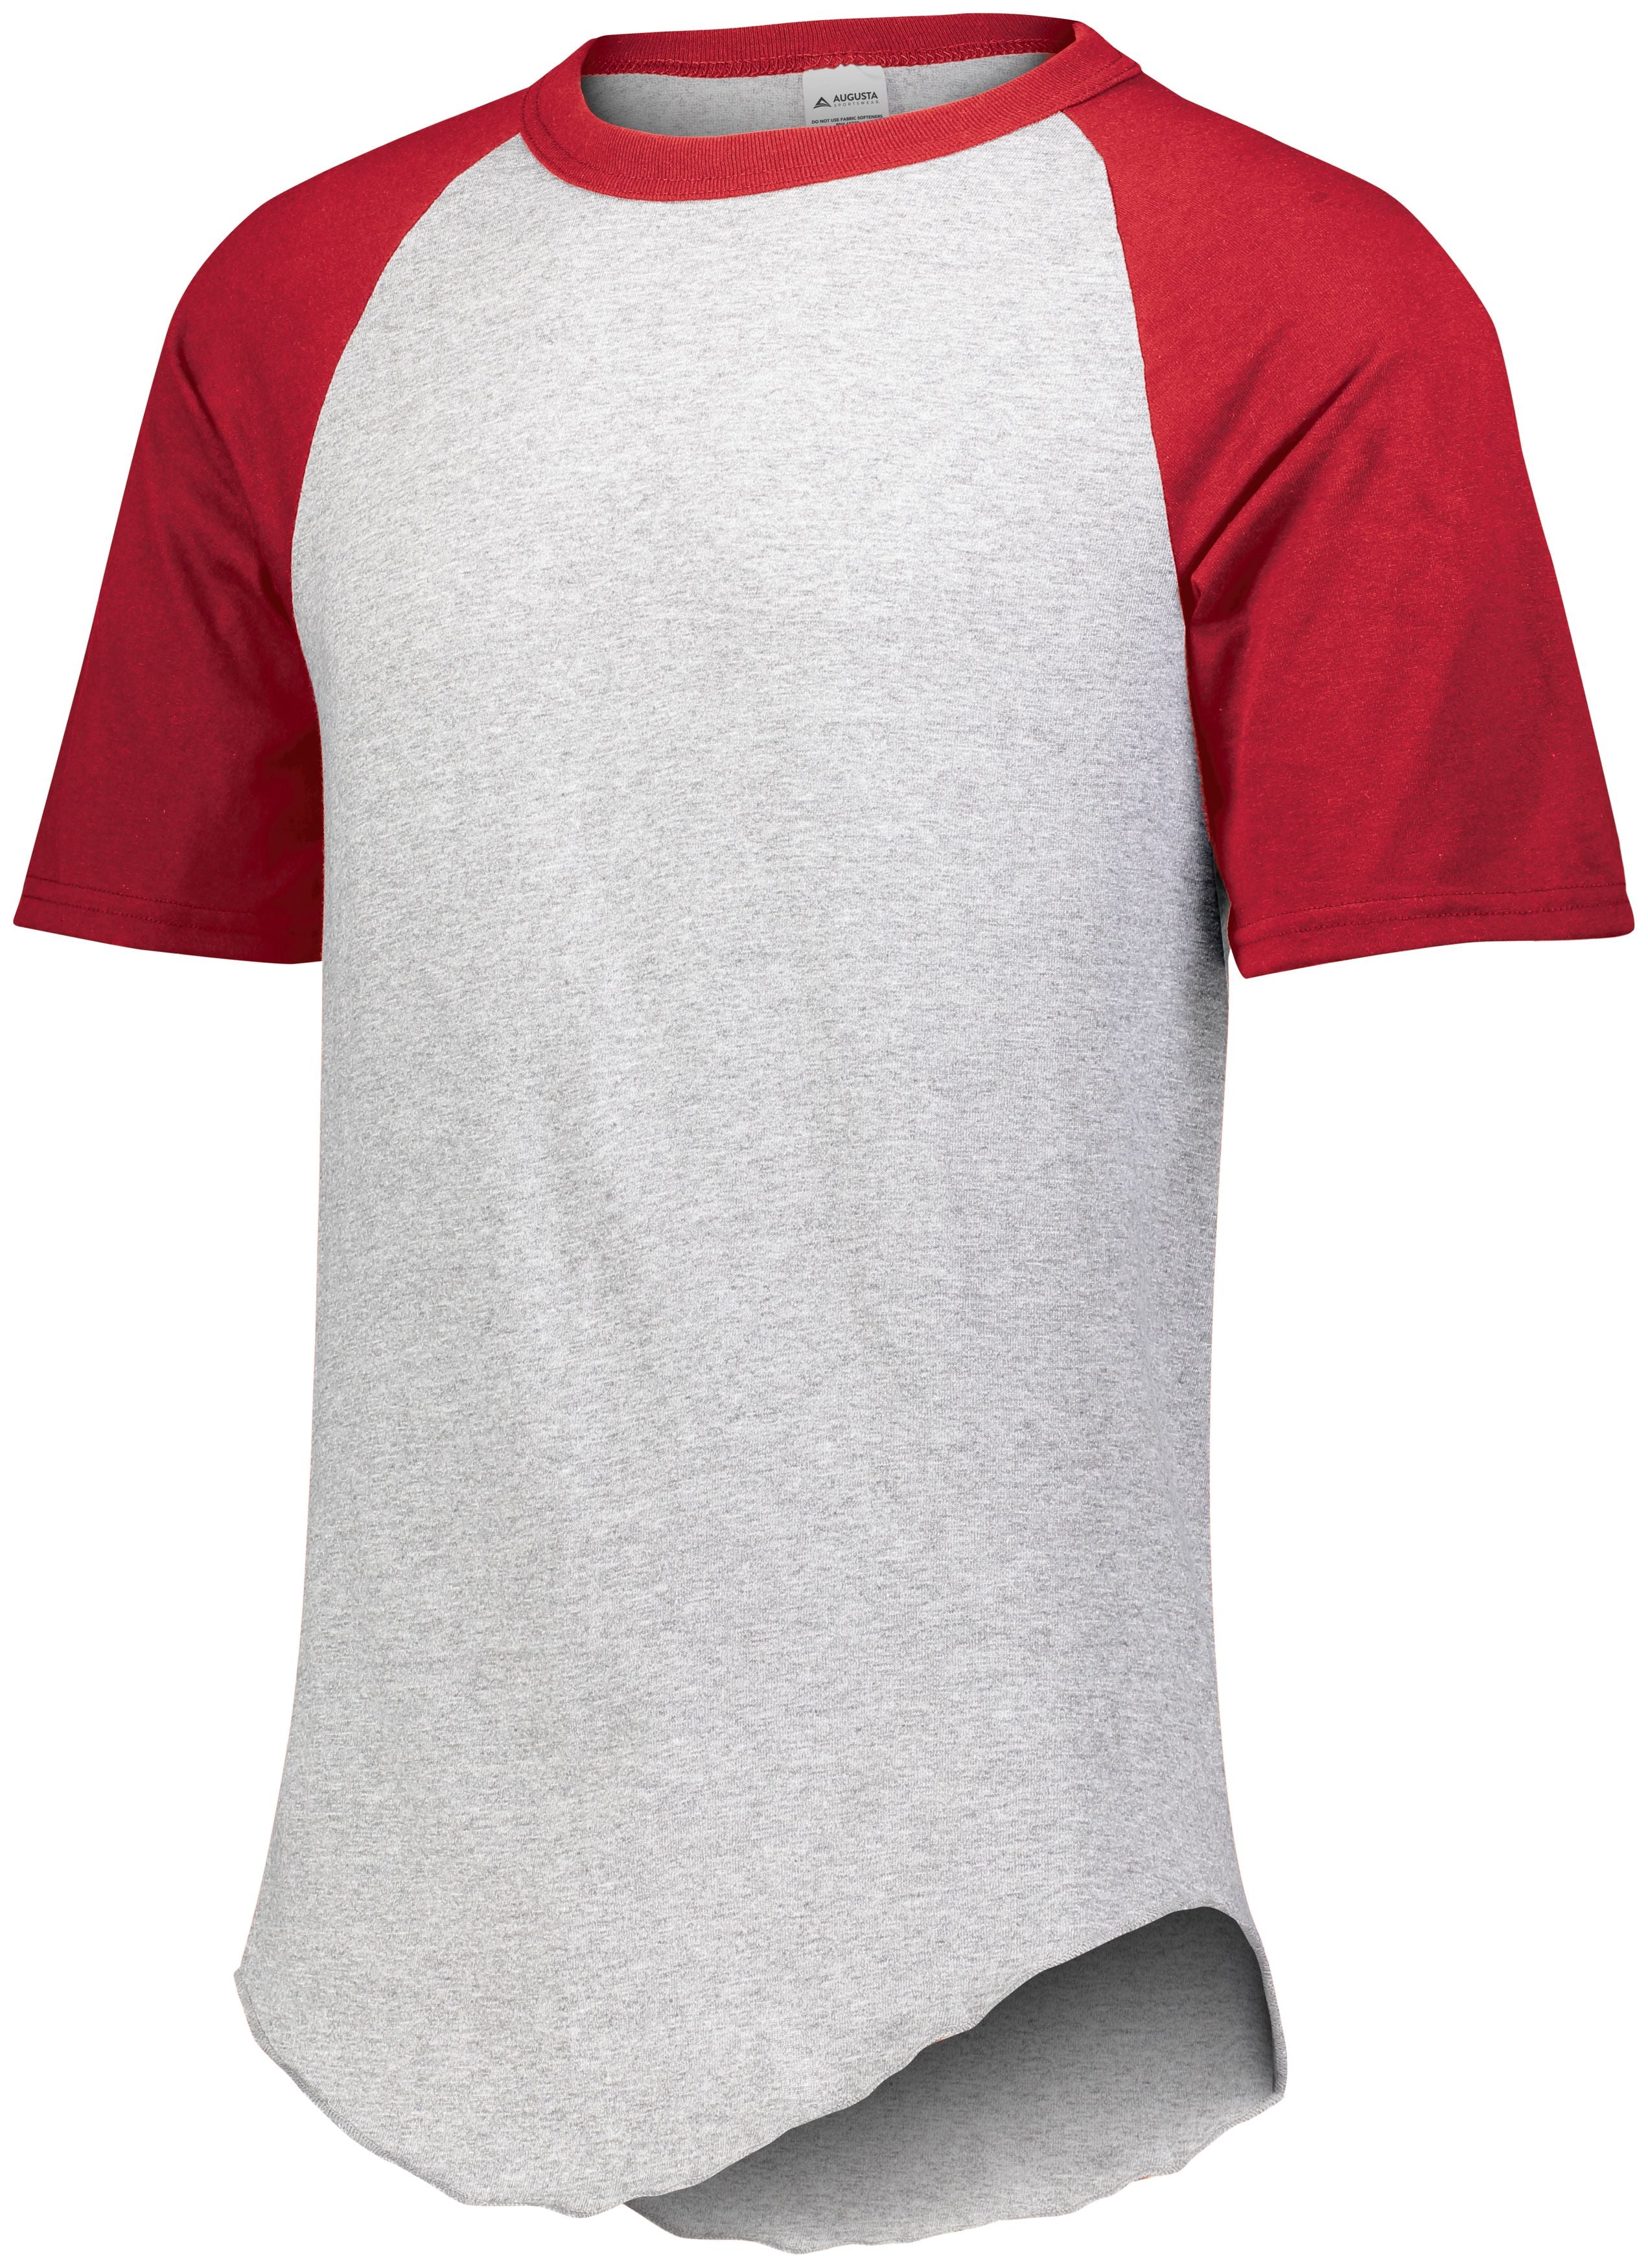 Augusta Sportswear Short Sleeve Baseball Jersey in Athletic Heather/Red  -Part of the Adult, Adult-Jersey, Augusta-Products, Baseball, Shirts, All-Sports, All-Sports-1 product lines at KanaleyCreations.com